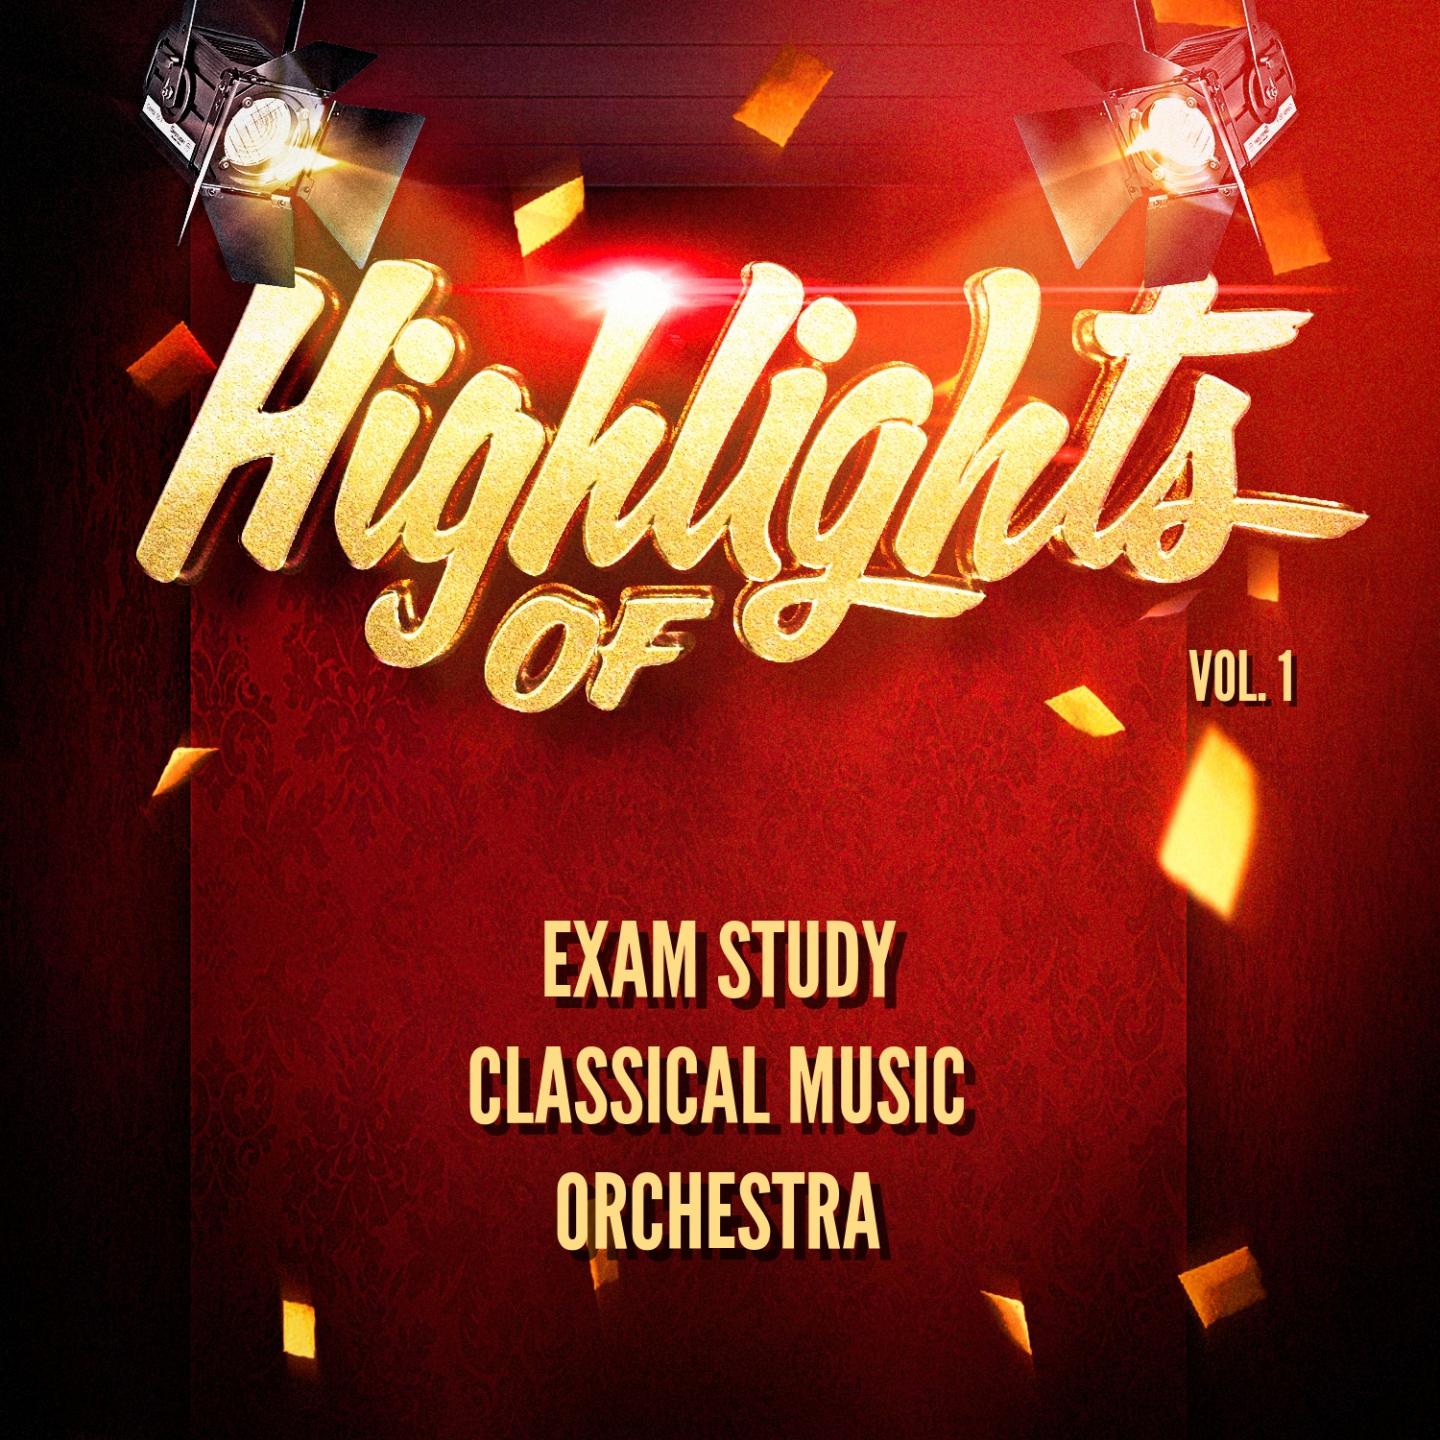 Highlights of exam study classical music orchestra, vol. 1